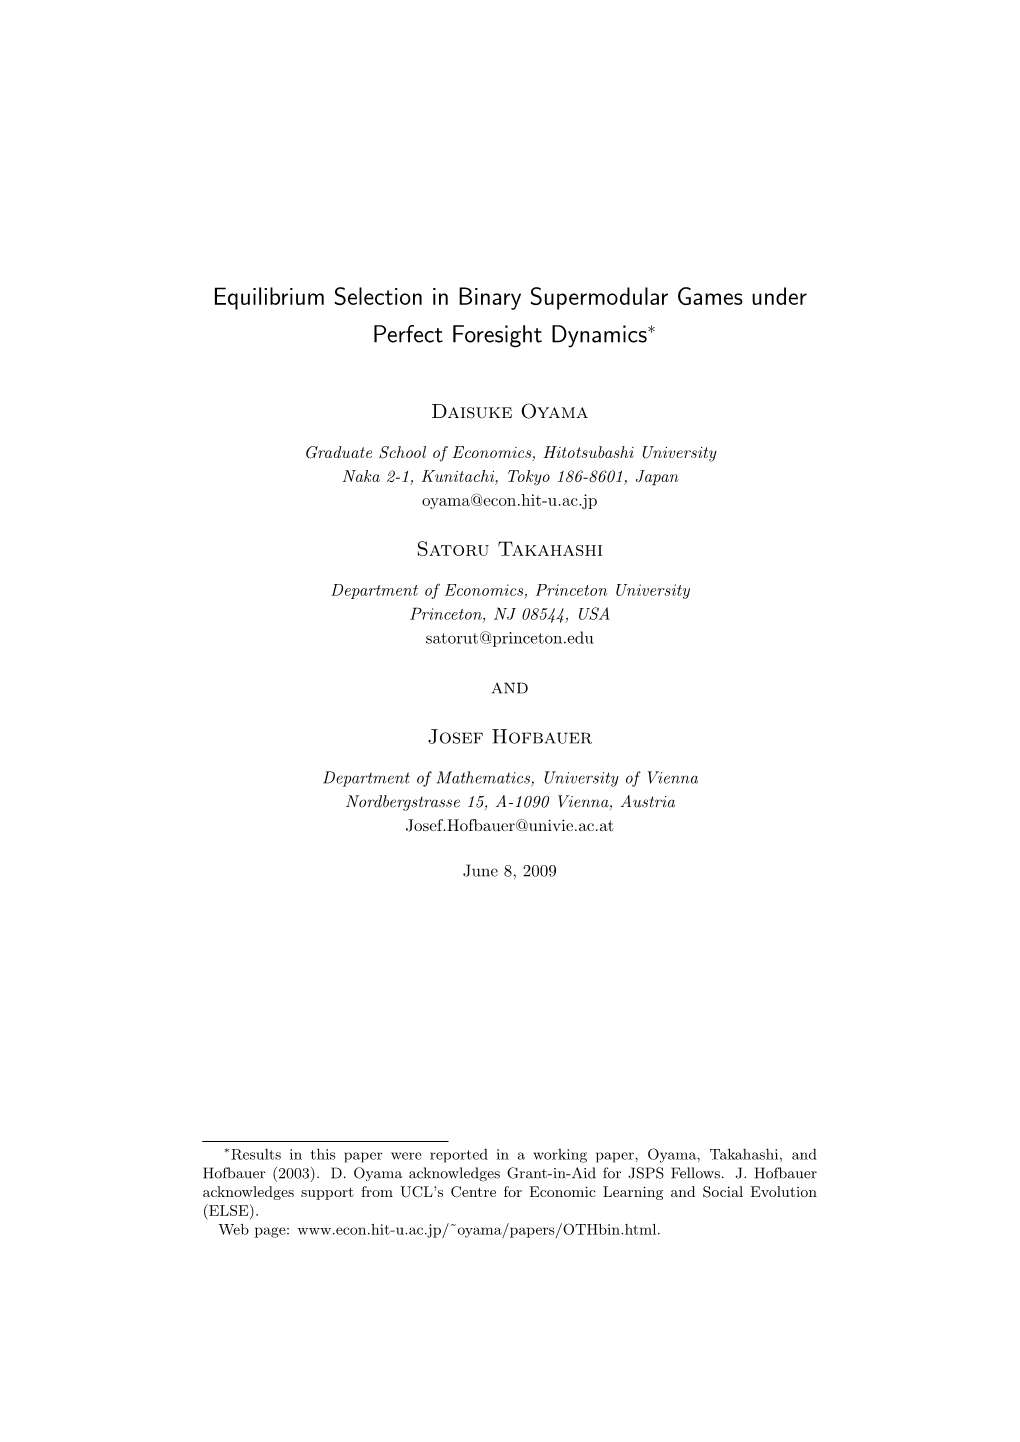 Equilibrium Selection in Binary Supermodular Games Under Perfect Foresight Dynamics∗